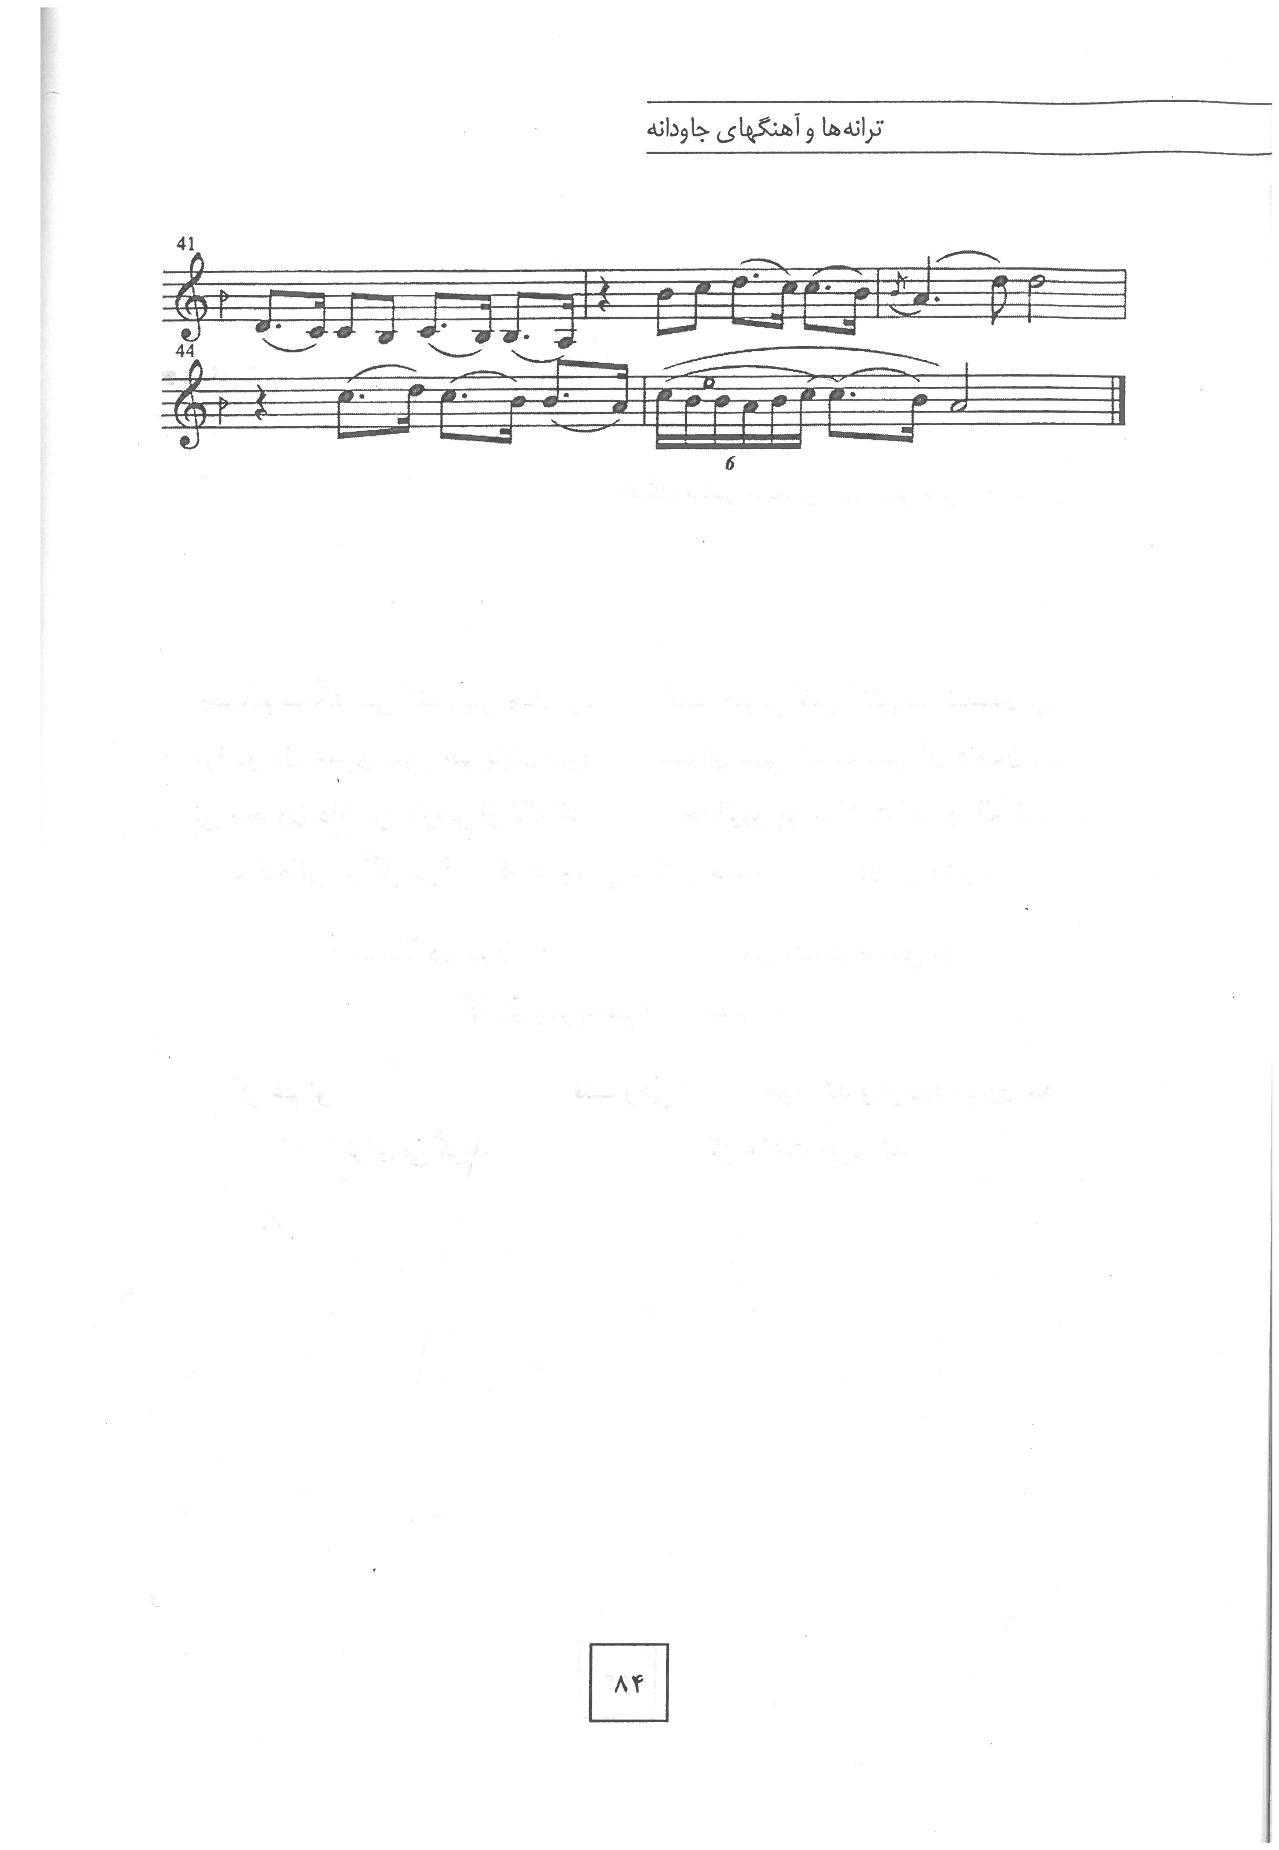 A sheet music page with the words " this is what i am " written in it.